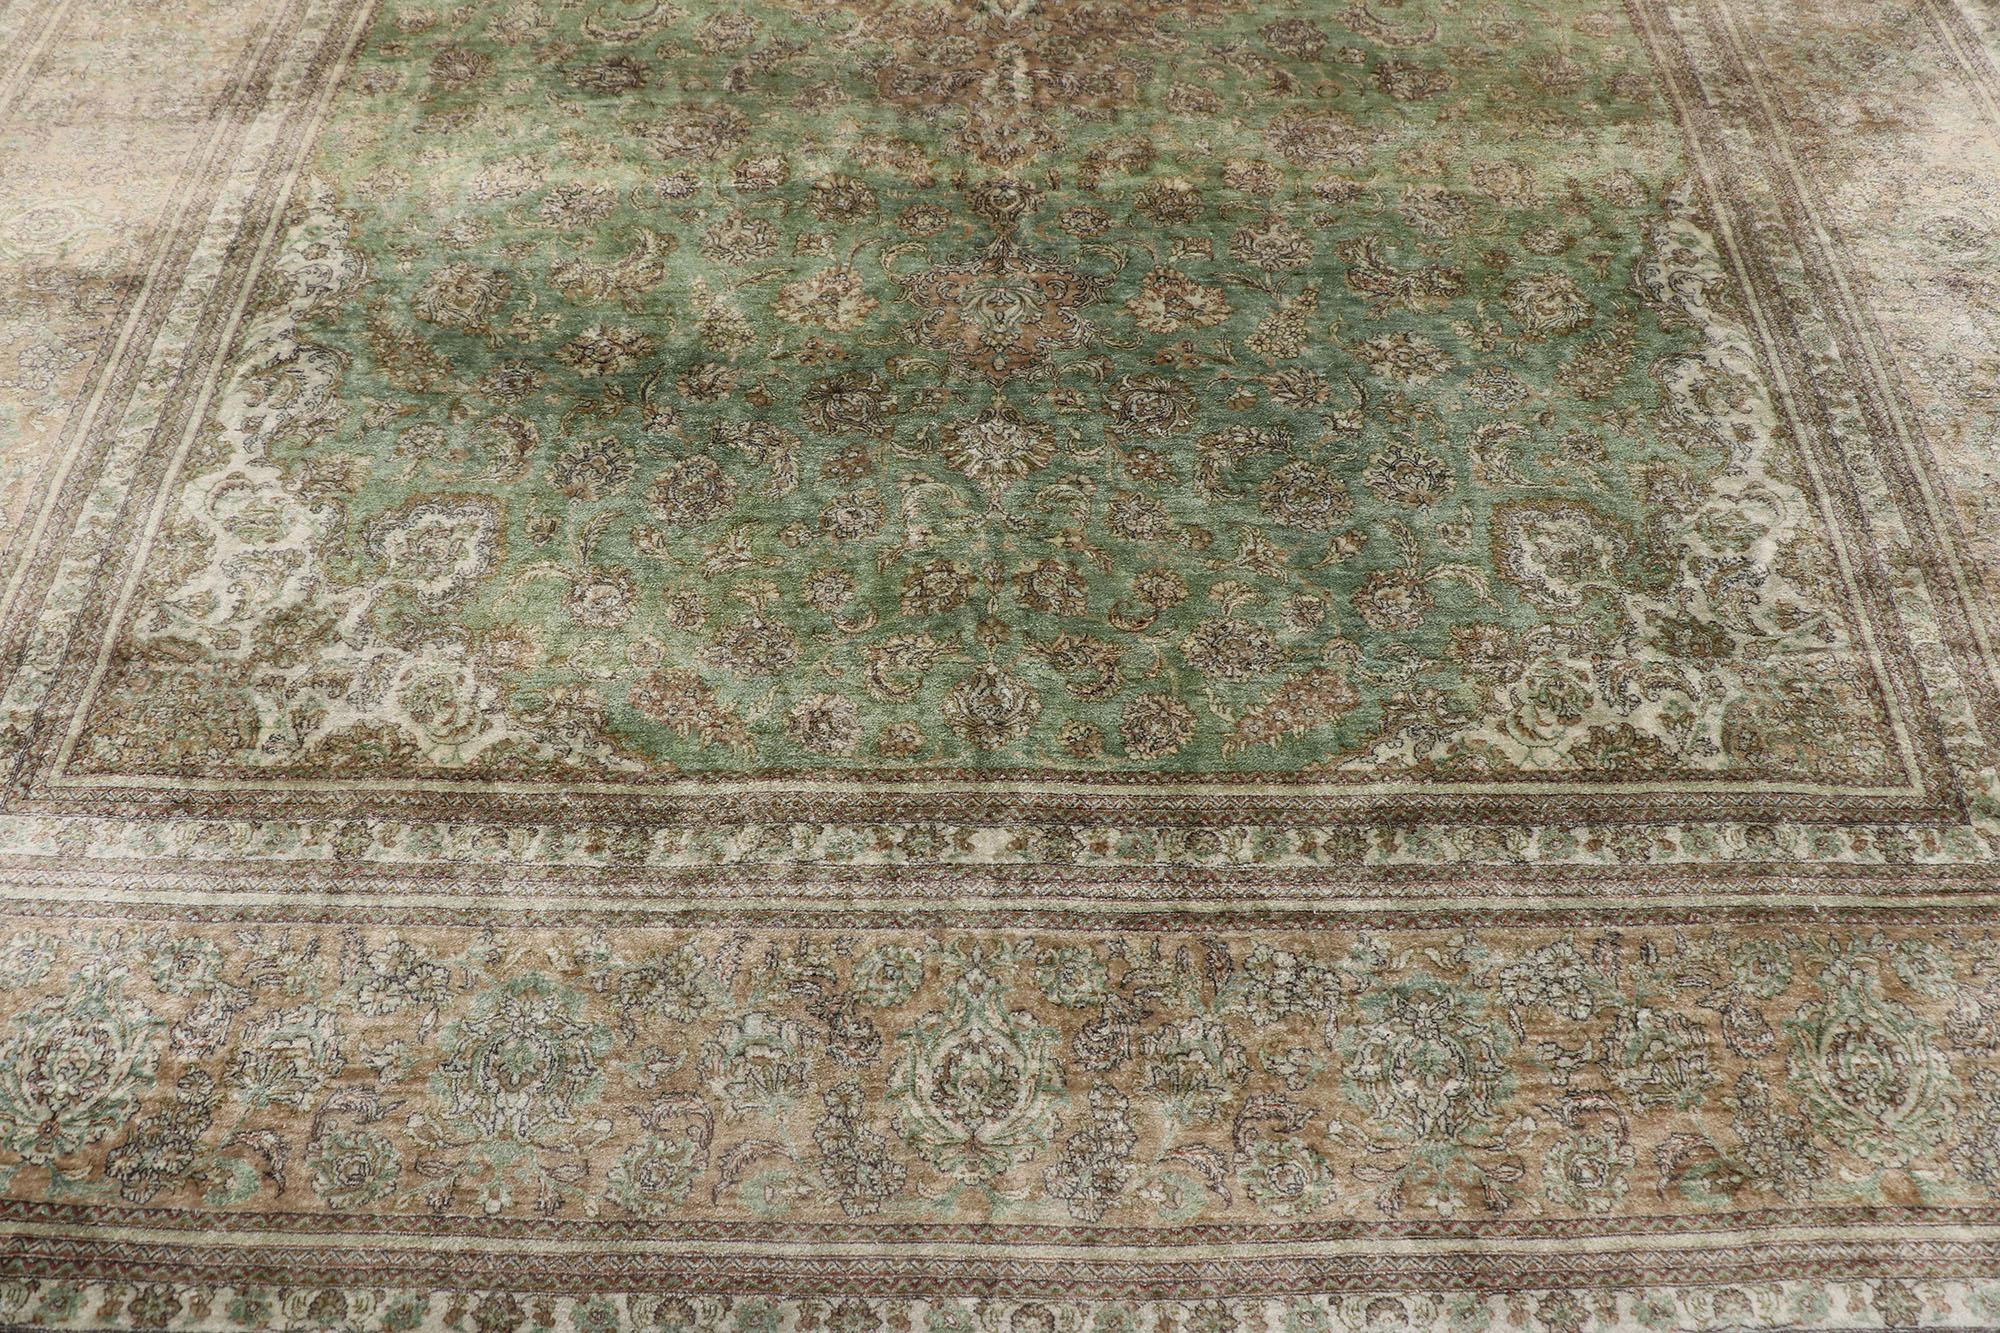 Hand-Knotted Vintage Persian Silk Qum Rug with Warm Earth-Tone Colors